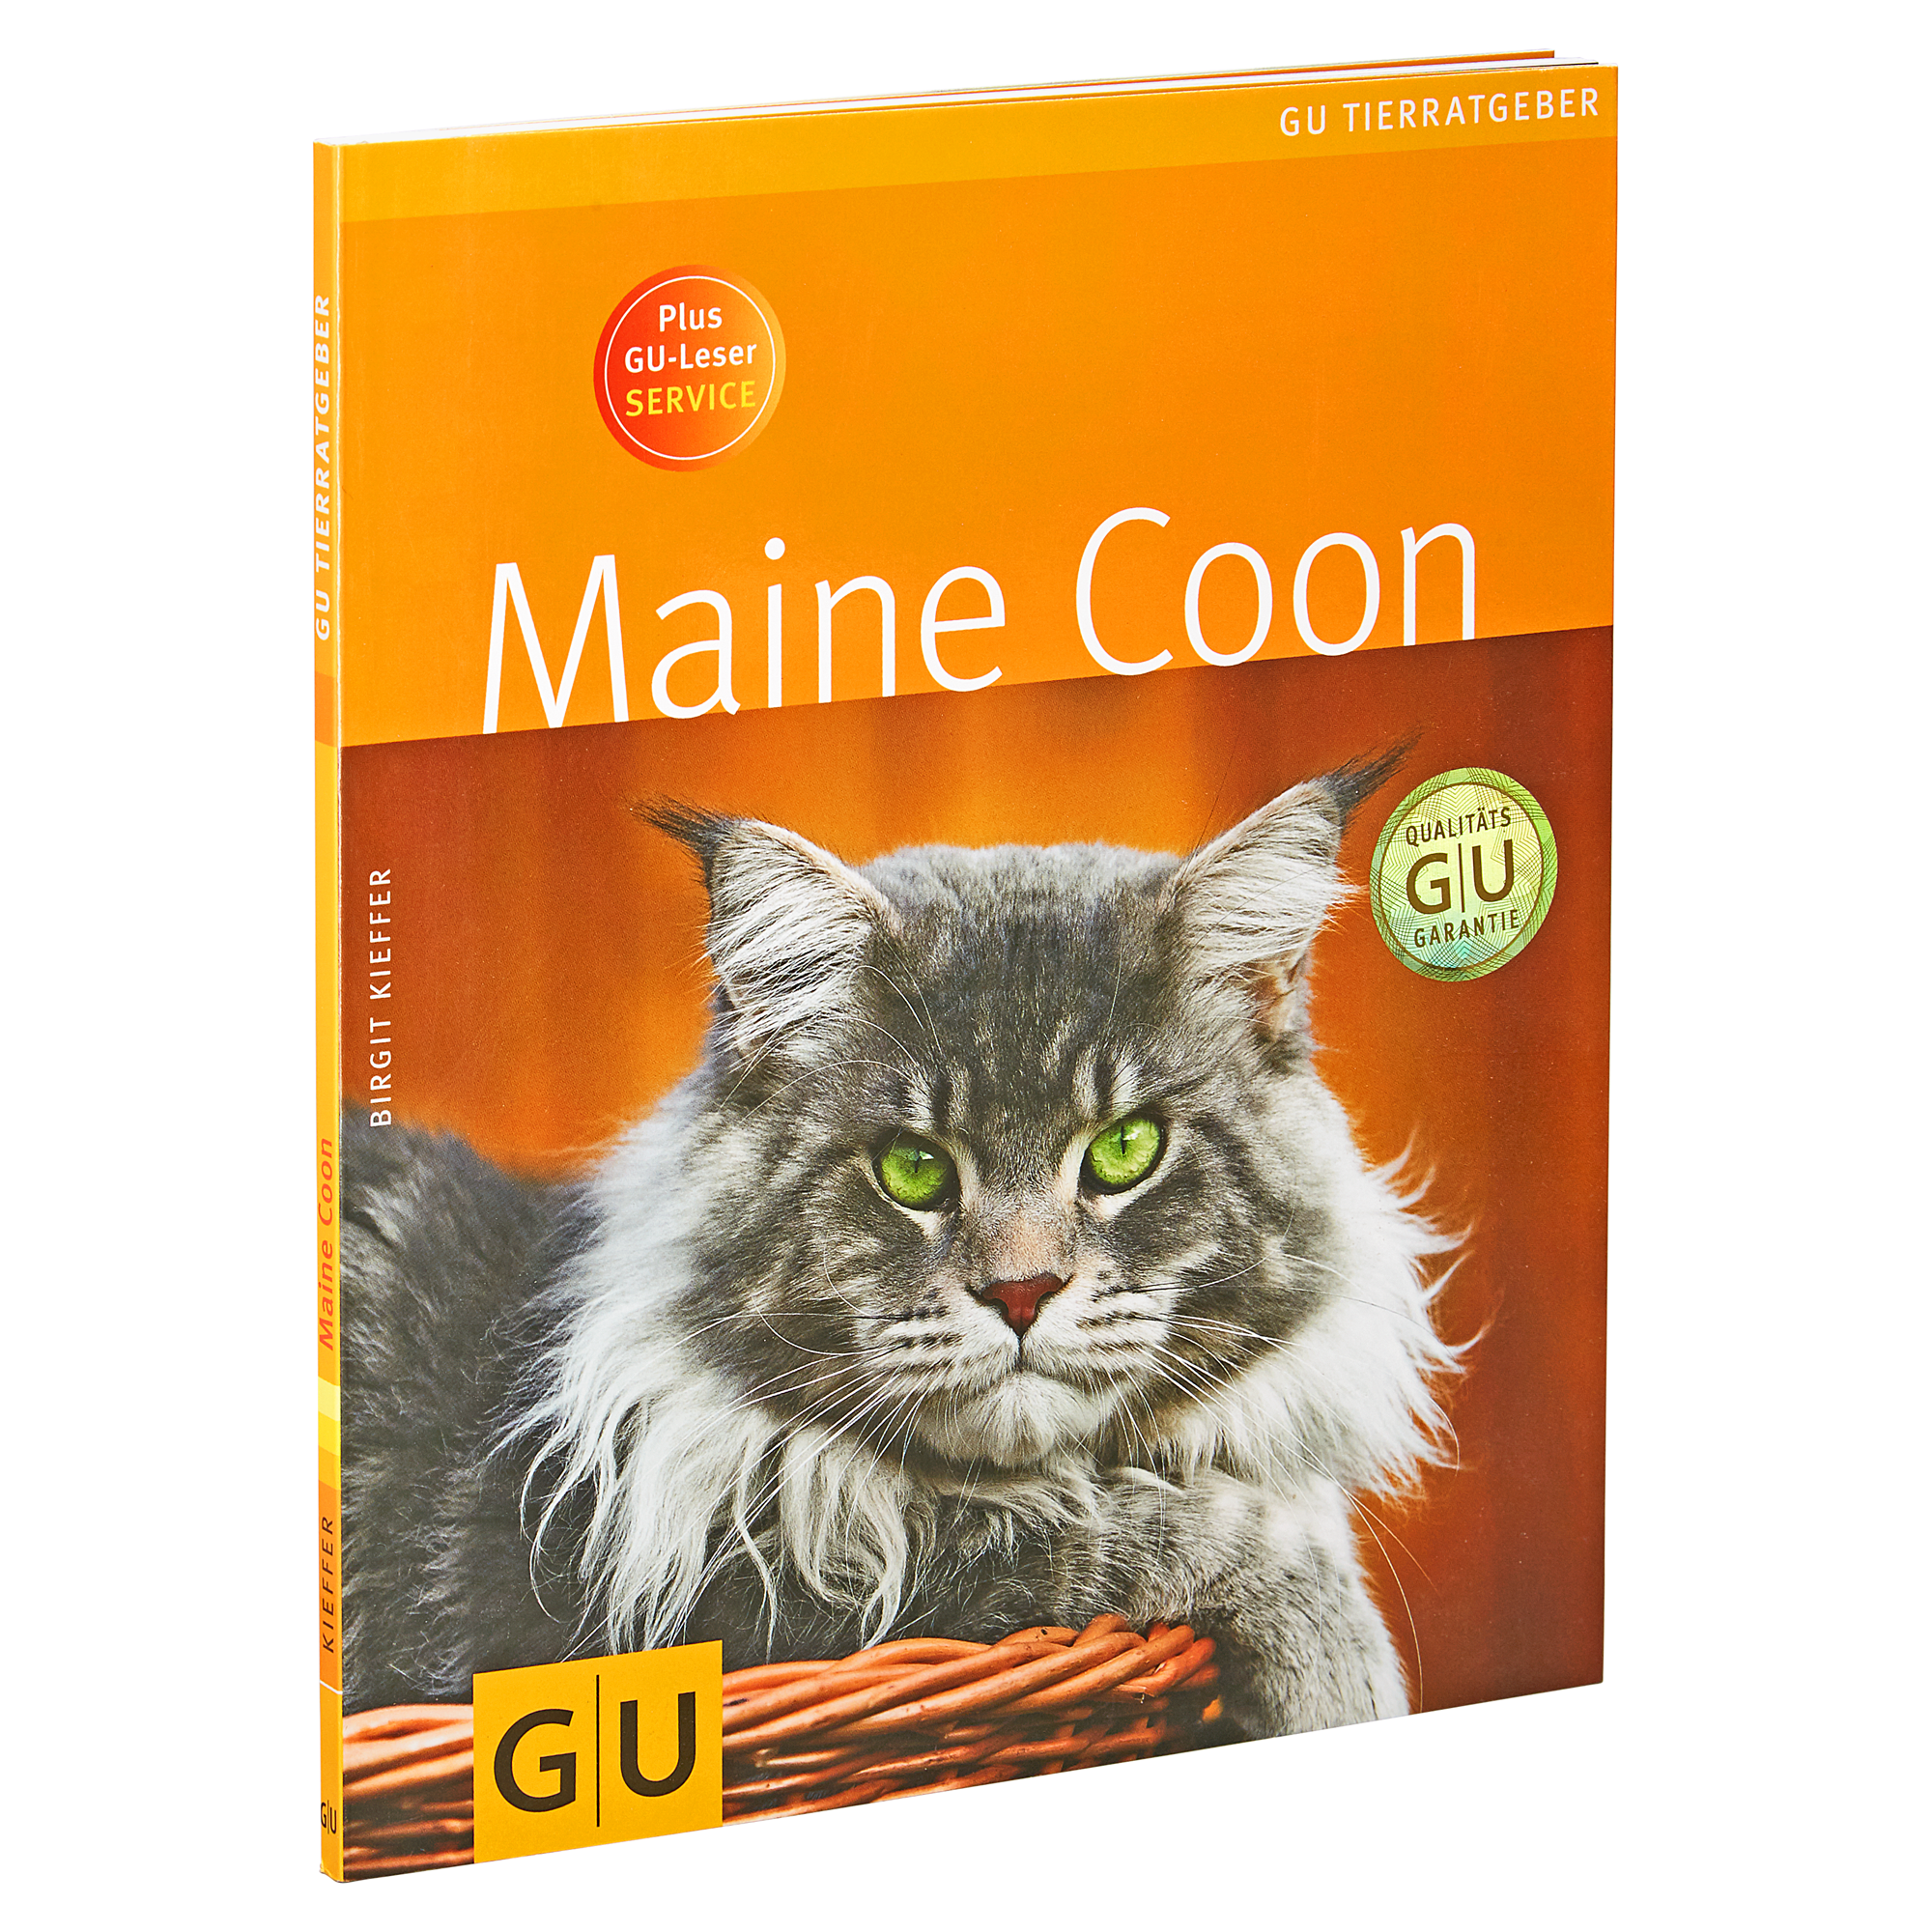 GU-Tierratgeber "Maine Coon" PB 64 S. + product picture